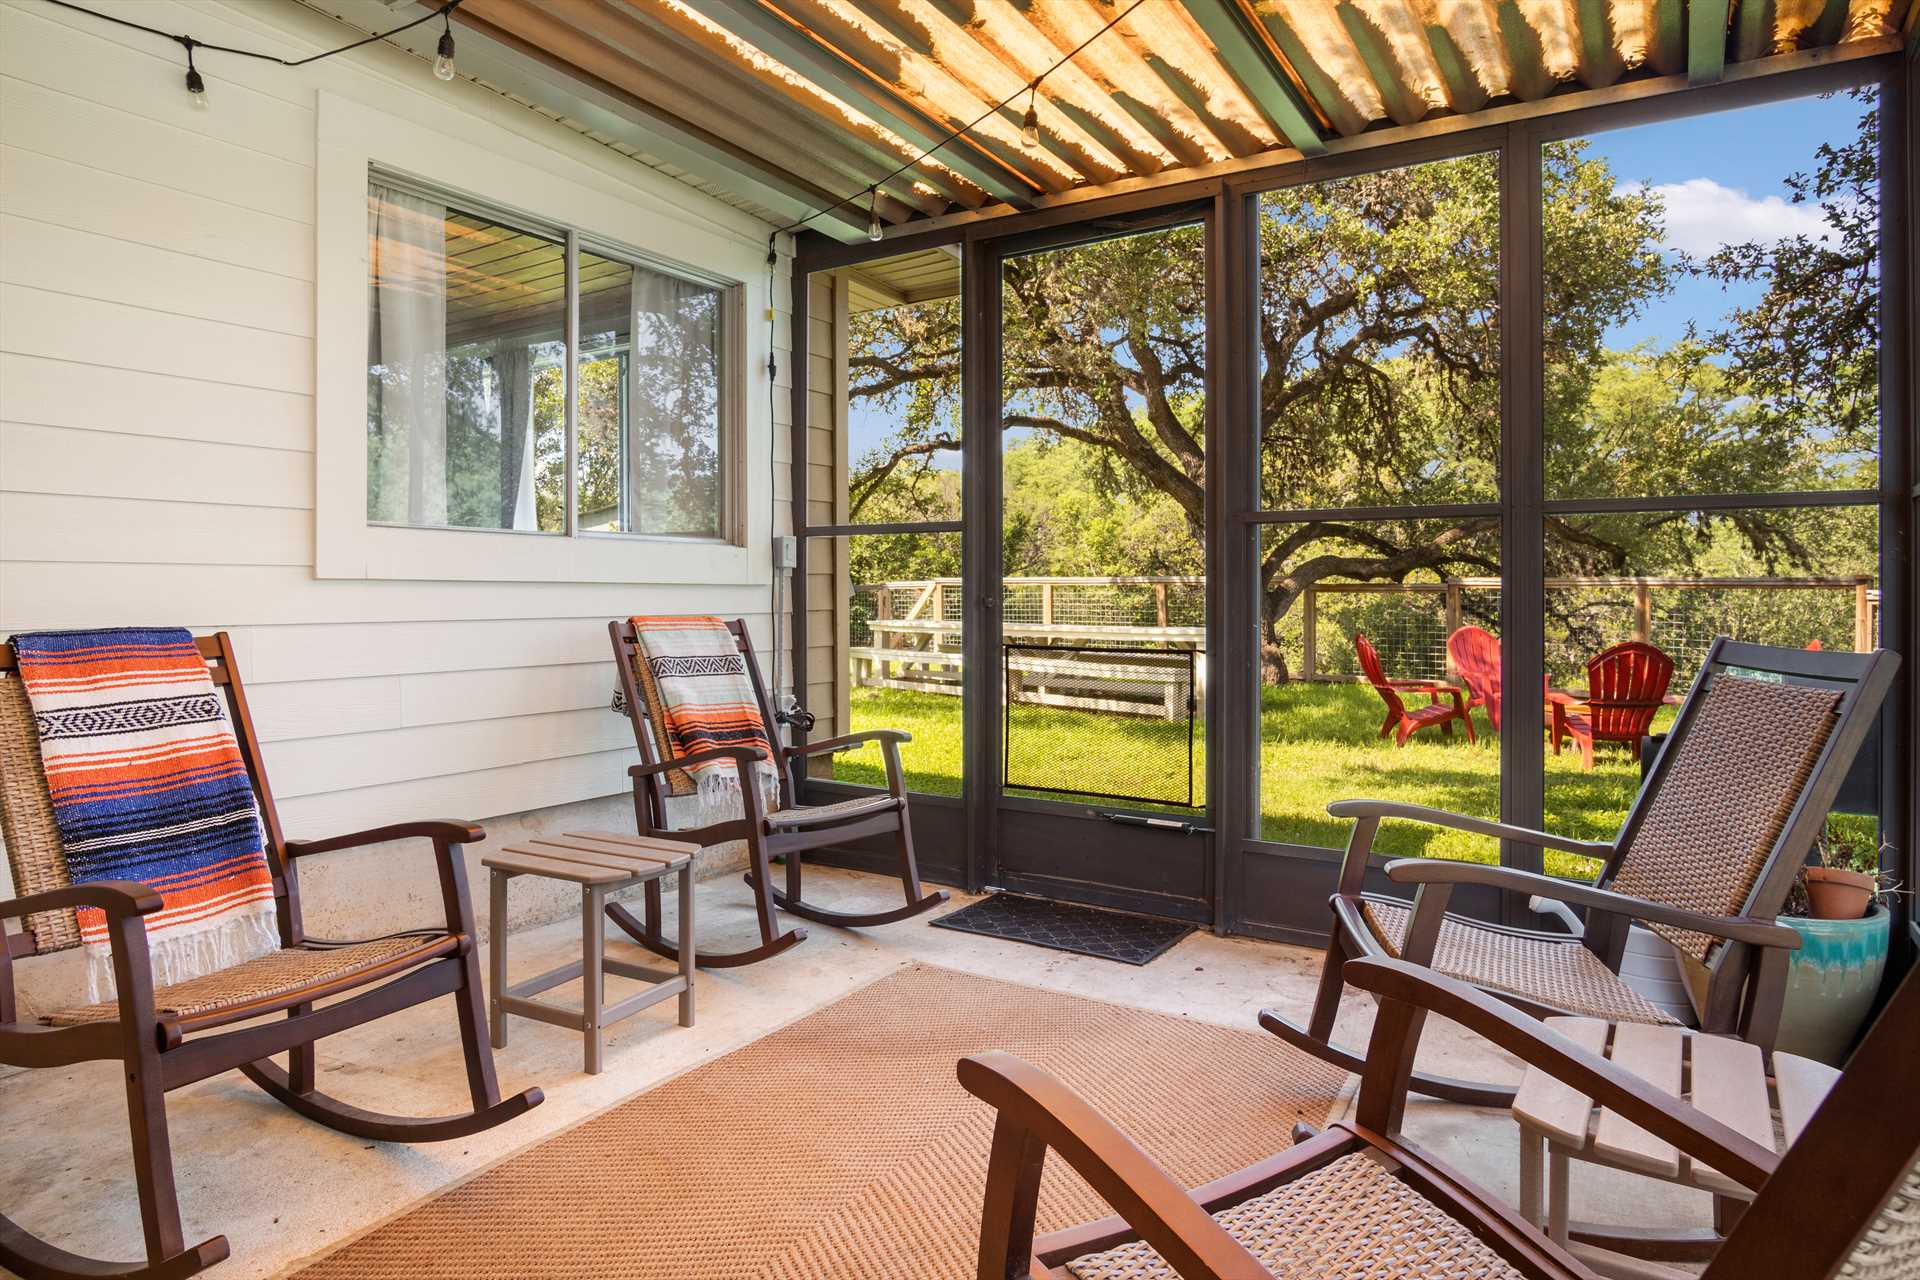                                                 Enjoy a relaxing moment on a rocking chair in the cool breezes of the shaded and screened patio!